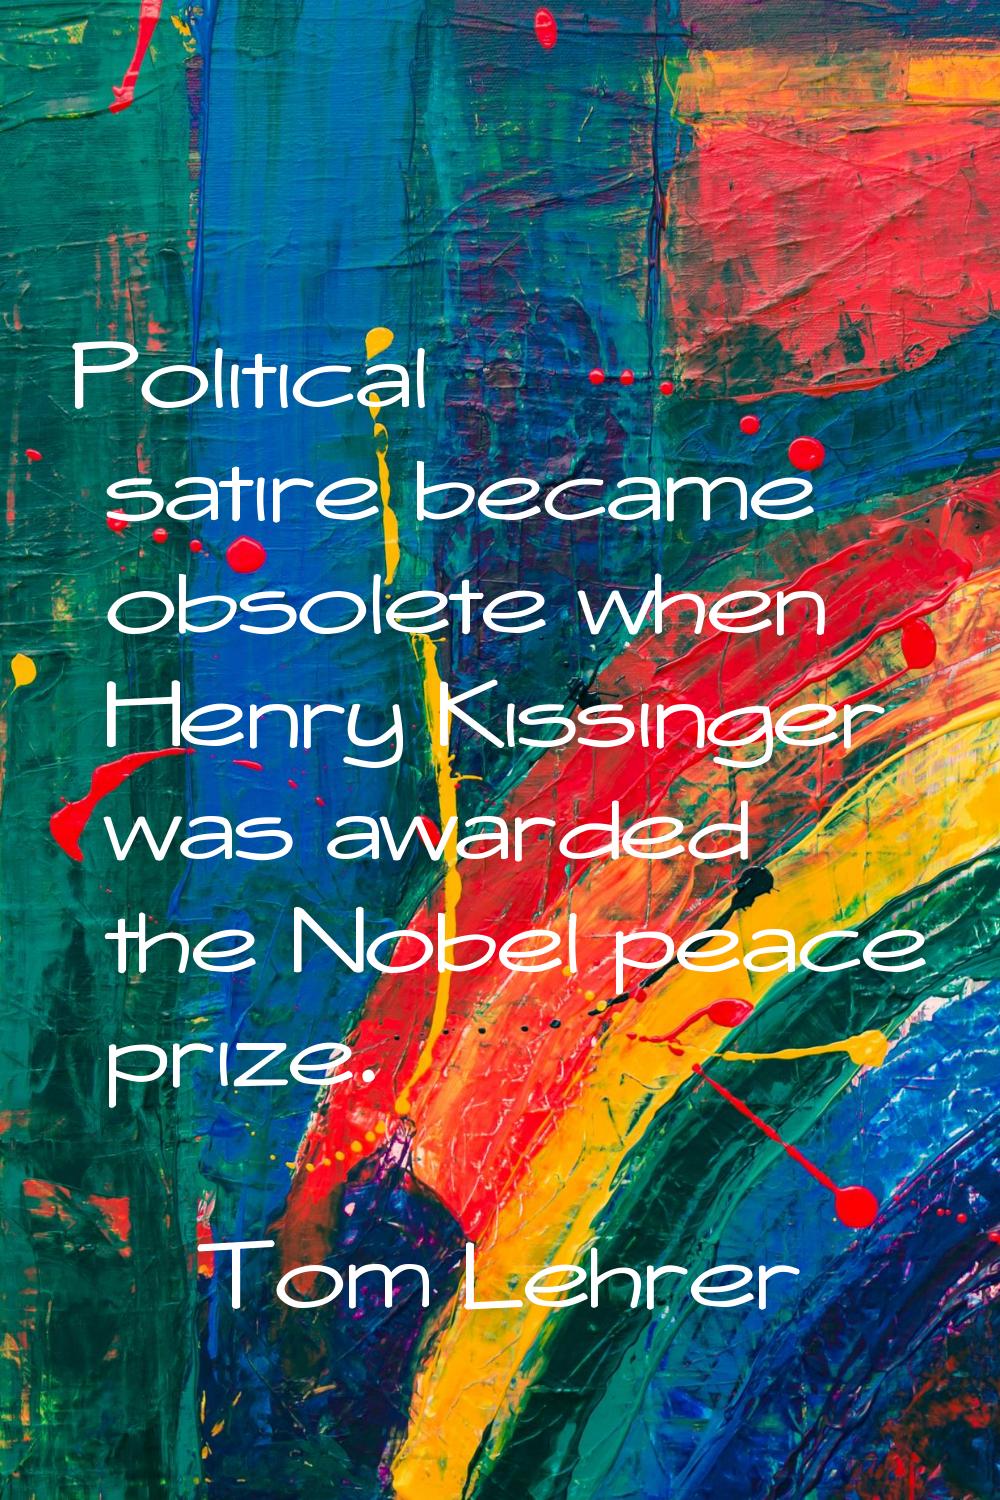 Political satire became obsolete when Henry Kissinger was awarded the Nobel peace prize.